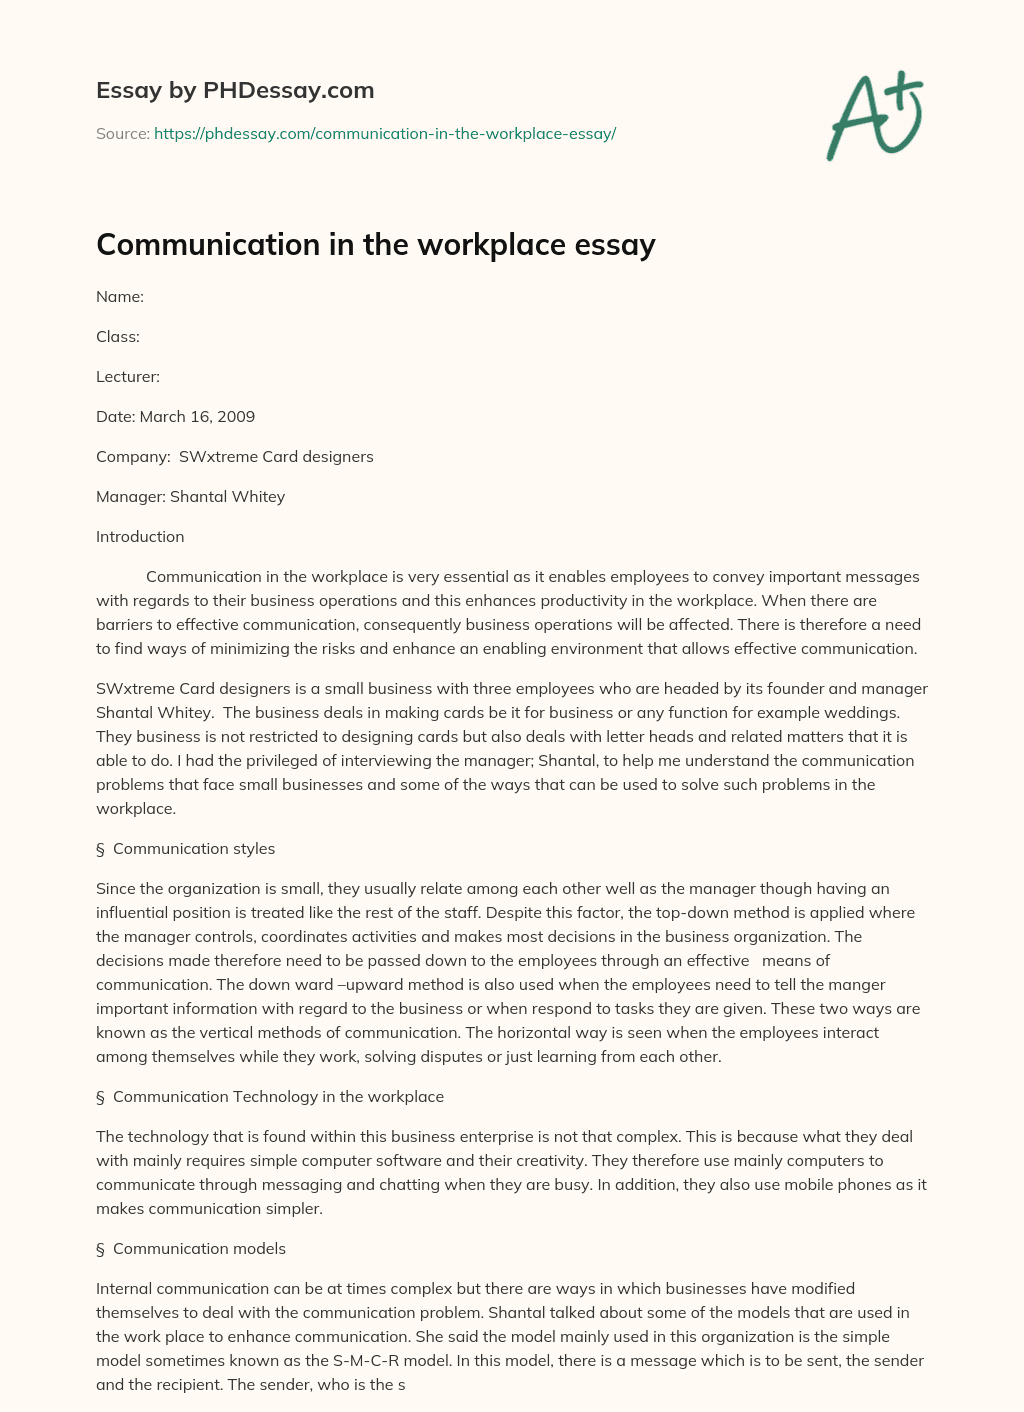 essay about communication in the workplace